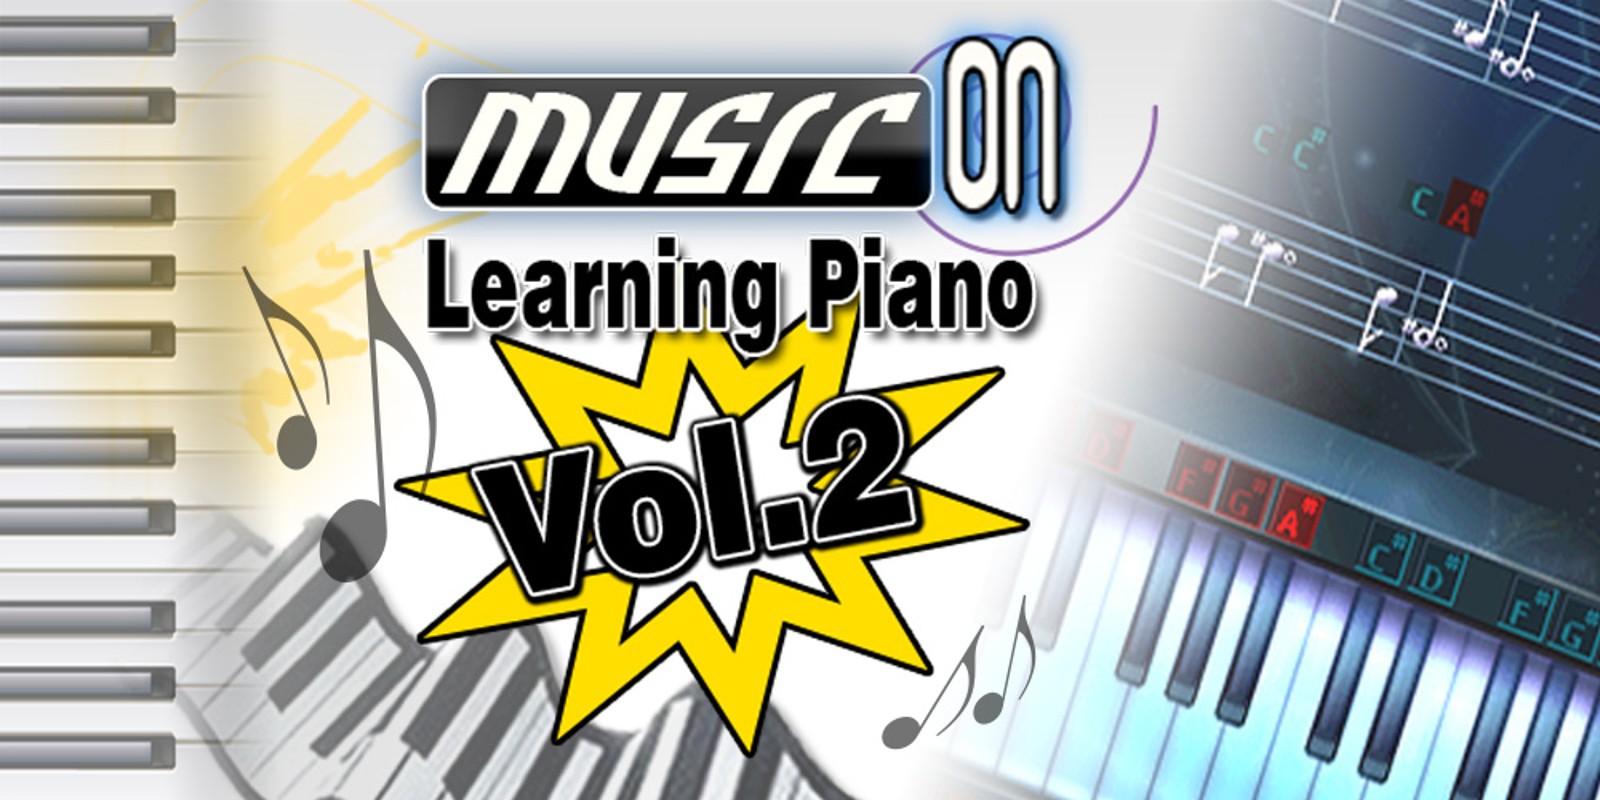 Music on: Learning Piano Vol. 2